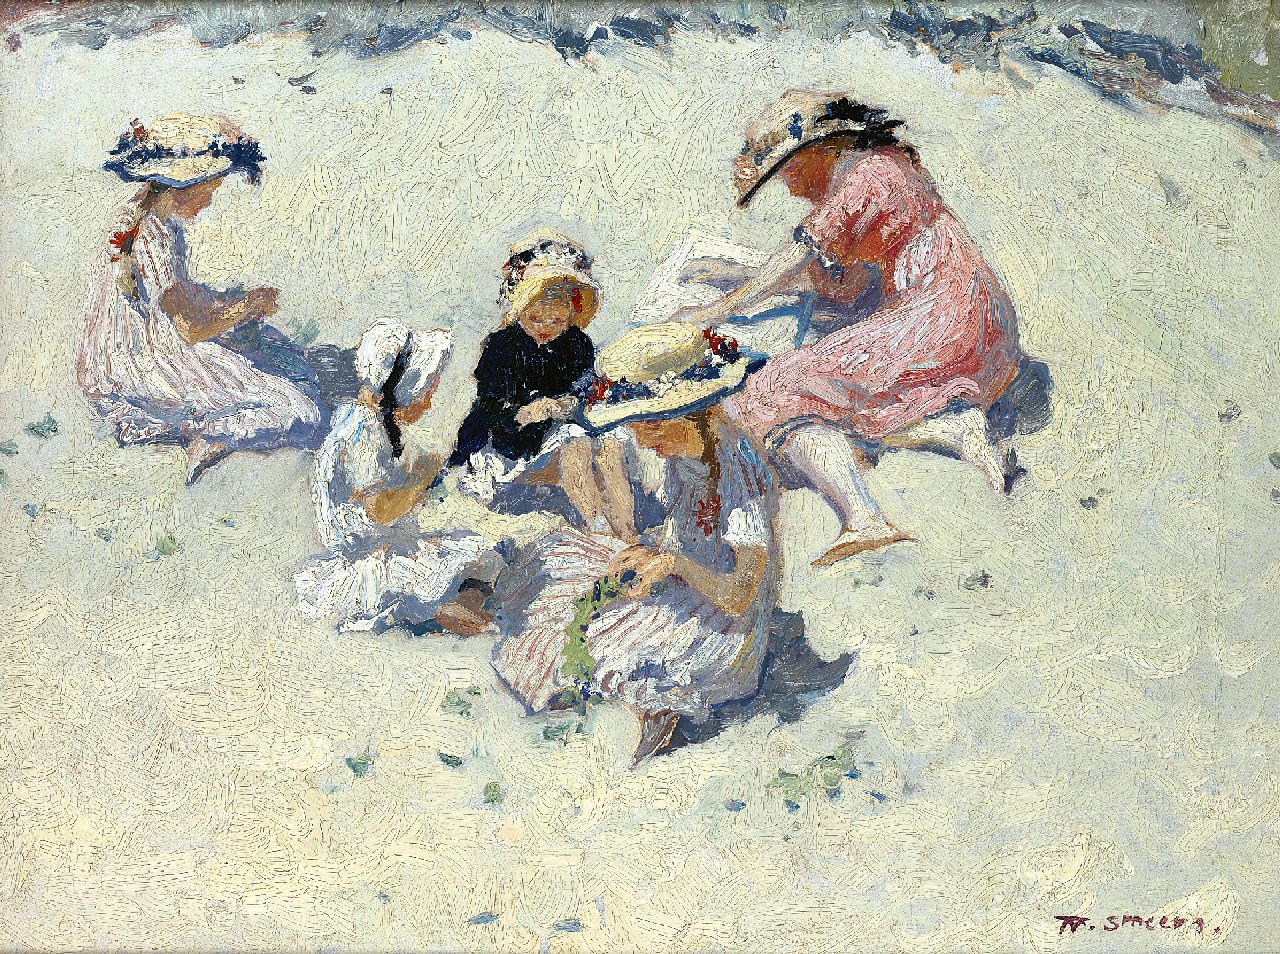 Smeers F.  | Frans Smeers, Children in the dunes, oil on canvas 45.3 x 60.4 cm, signed l.r. and painted 1911 on the reverse